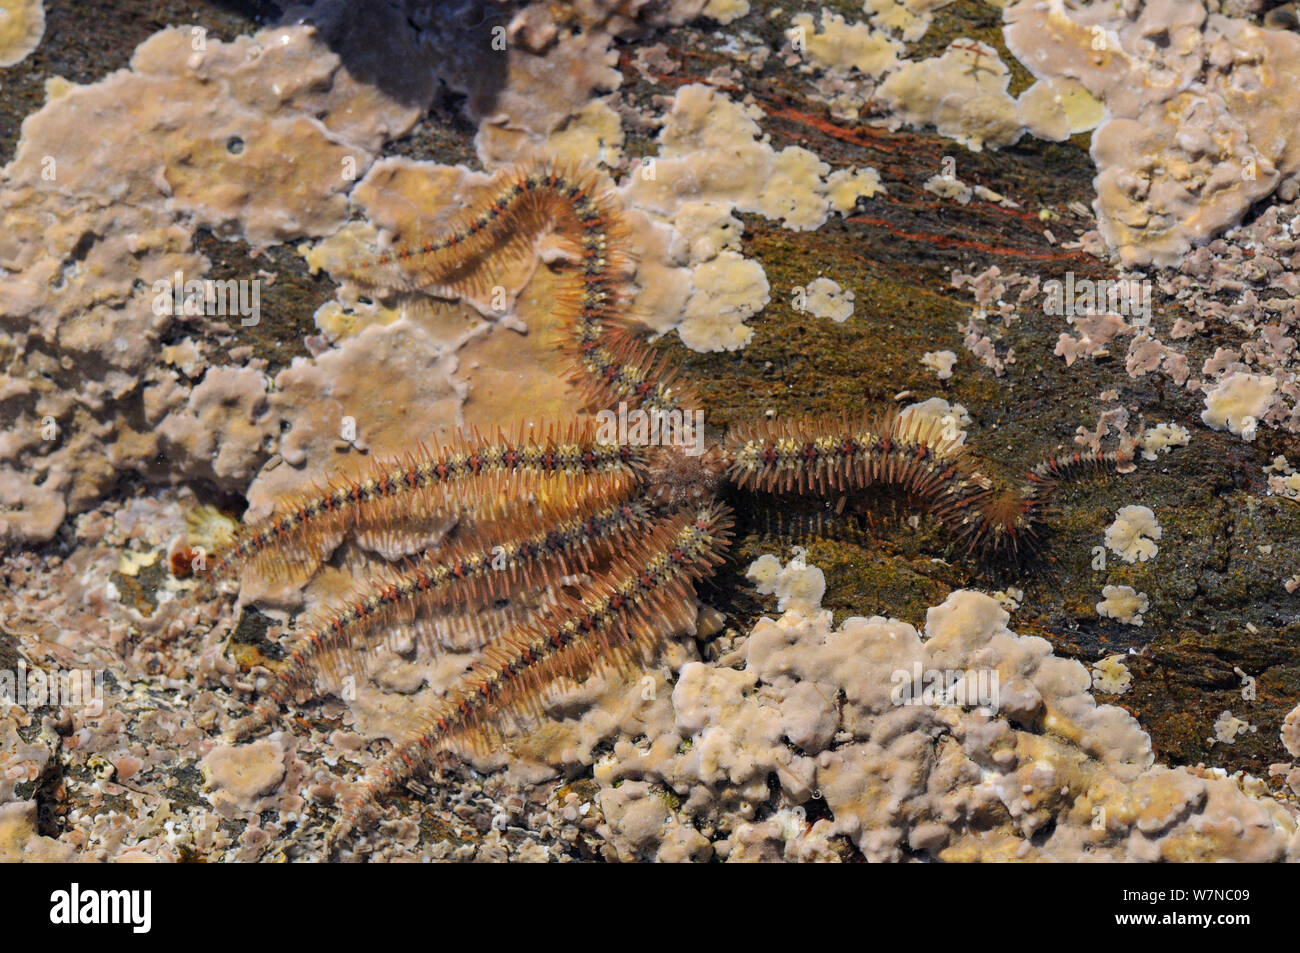 Common brittle star (Ophiothrix fragilis) moving over floor of rockpool encrusted with red algae (Lithomnanion sp.), near Falmouth, Cornwall, UK, August. Stock Photo